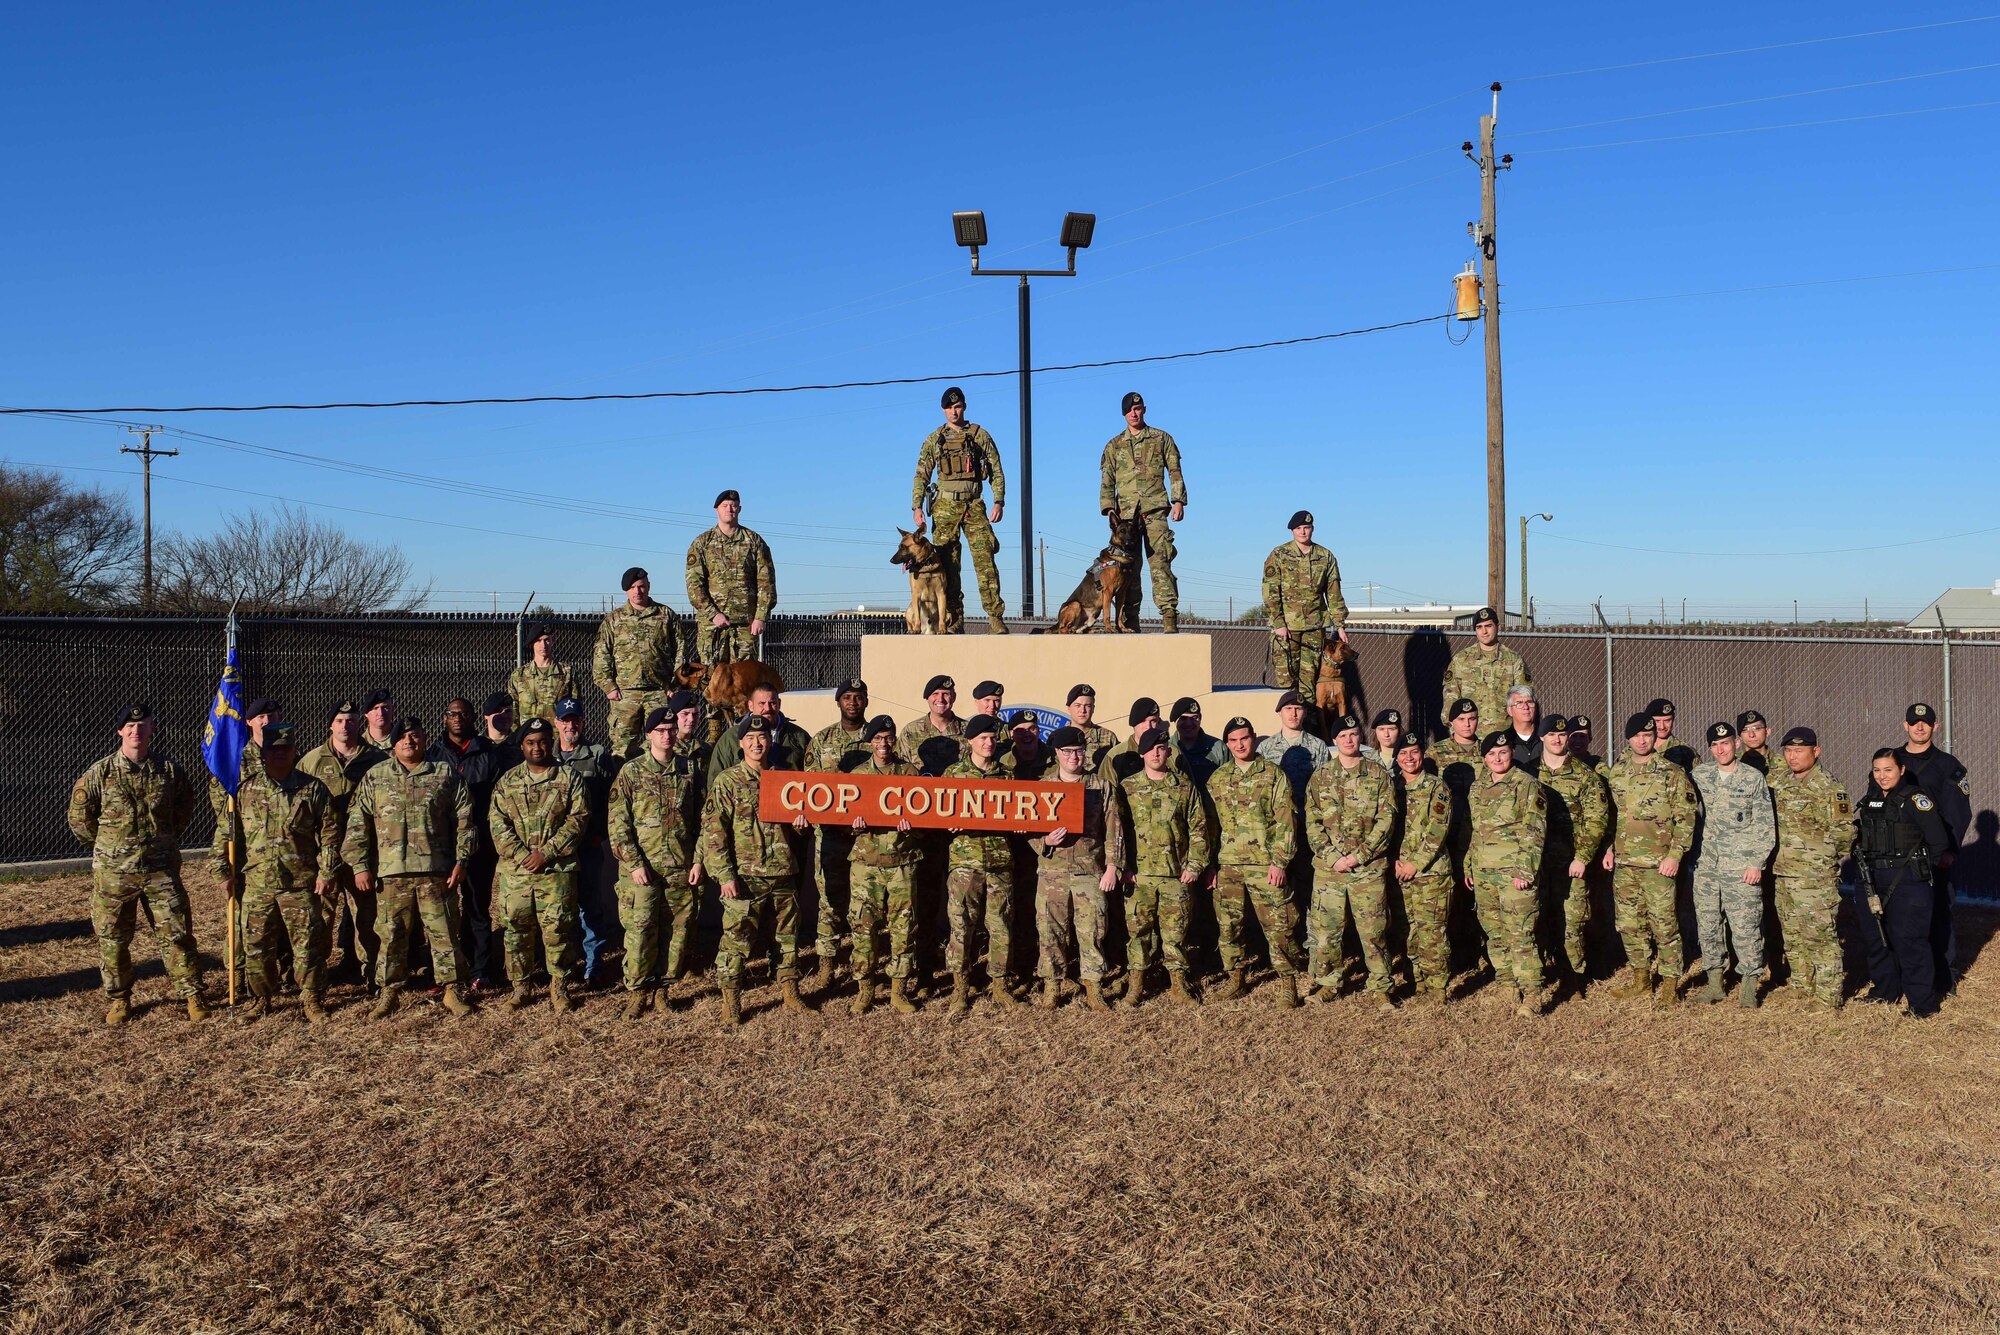 Members of the 47th Security Forces Squadron pose for a group photo at Laughlin Air Force Base, Texas, Jan. 7, 2020. Every year on Jan. 9, the nation takes a day to celebrate and honor the service of all law enforcement agencies around the country and abroad as Law Enforcement Appreciation Day. This includes military law enforcement’s public service to ensure members of Laughlin work and live in a safe, threat-free environment. (U.S. Air Force photo by Staff Sgt. Benjamin N. Valmoja)